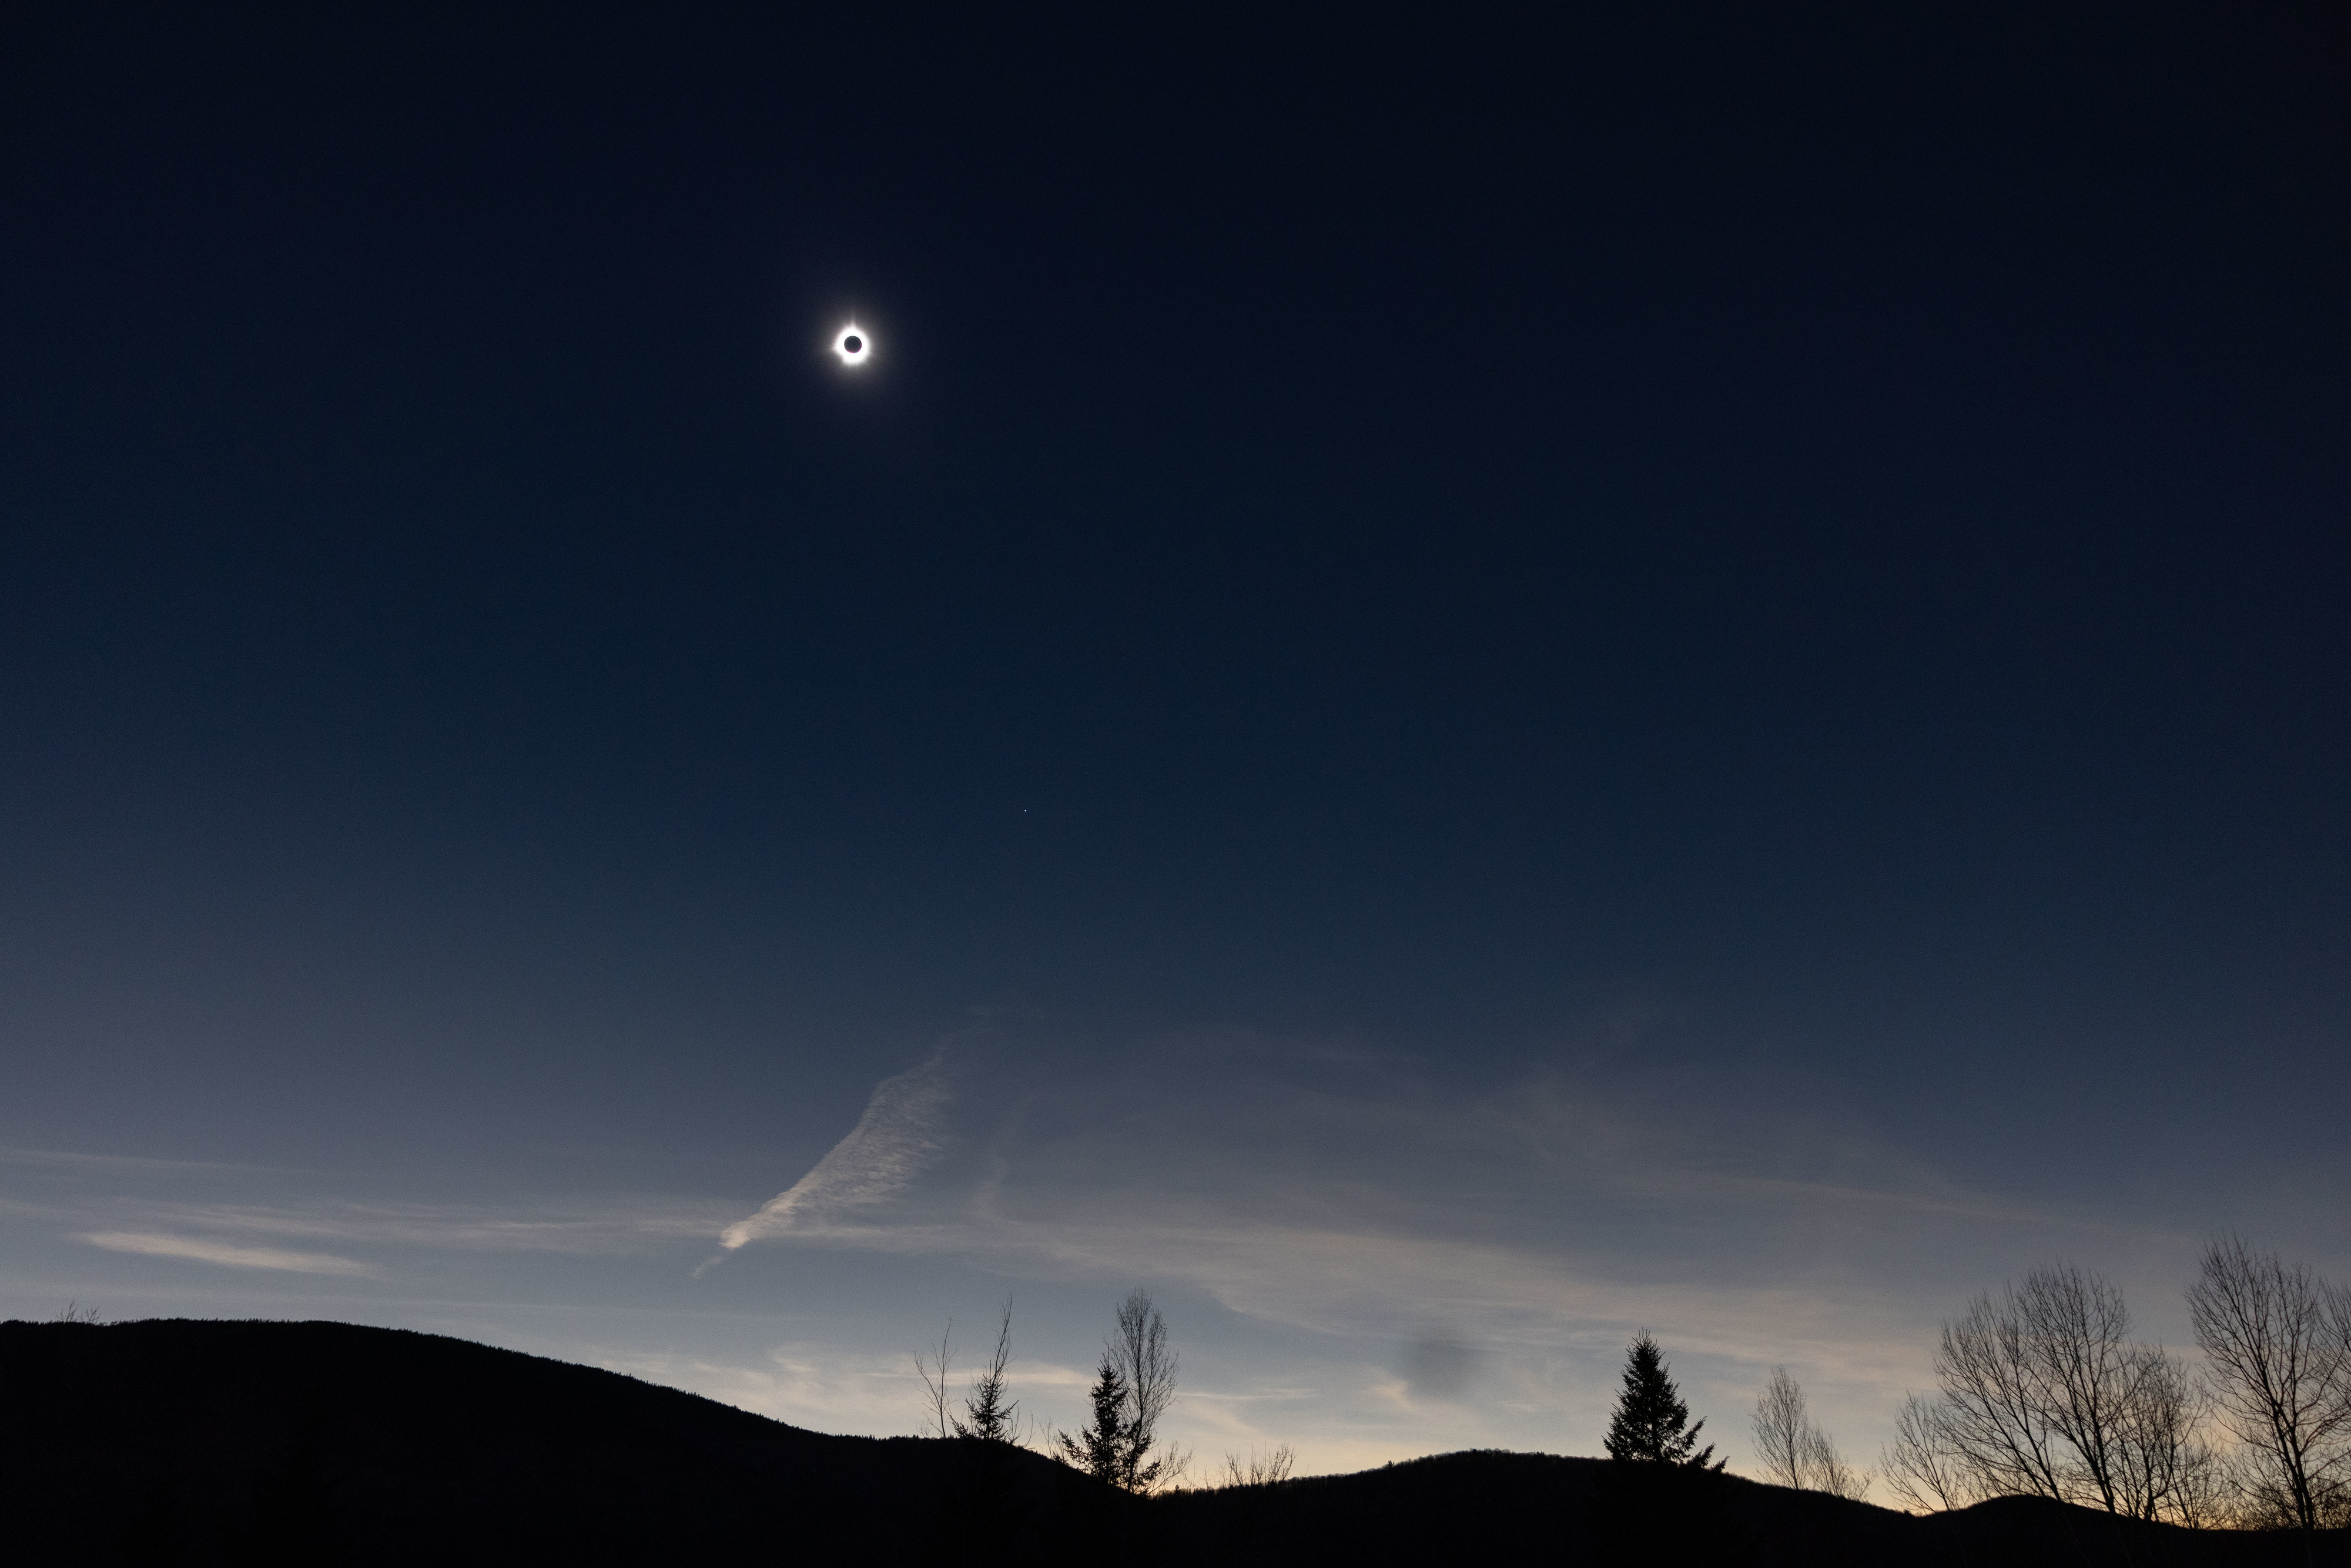 Total solar eclipse with corona visible over silhouette of hills and sparse foliage